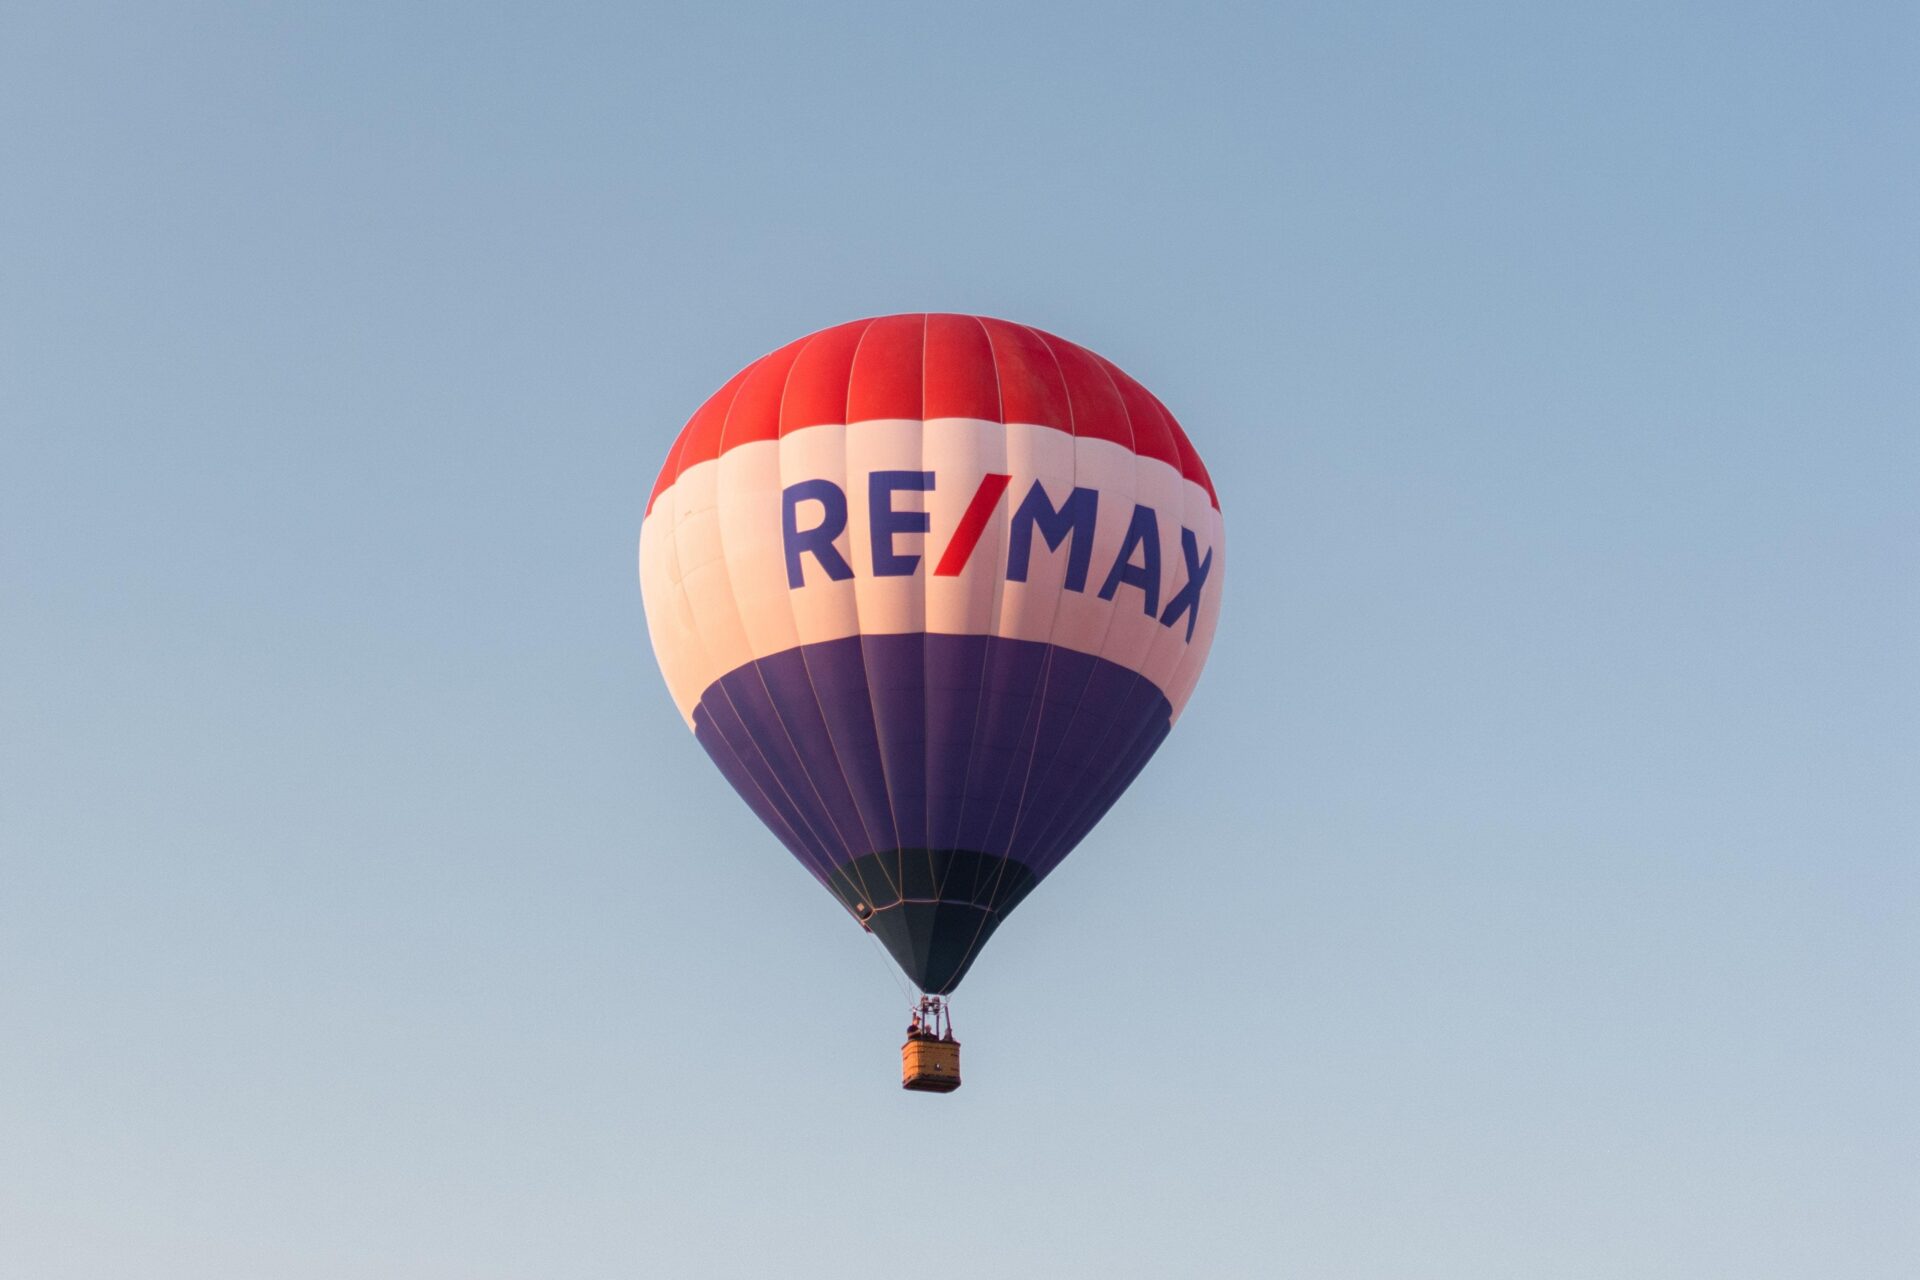 RE/MAX real estate brand on a hot air balloon in the sky